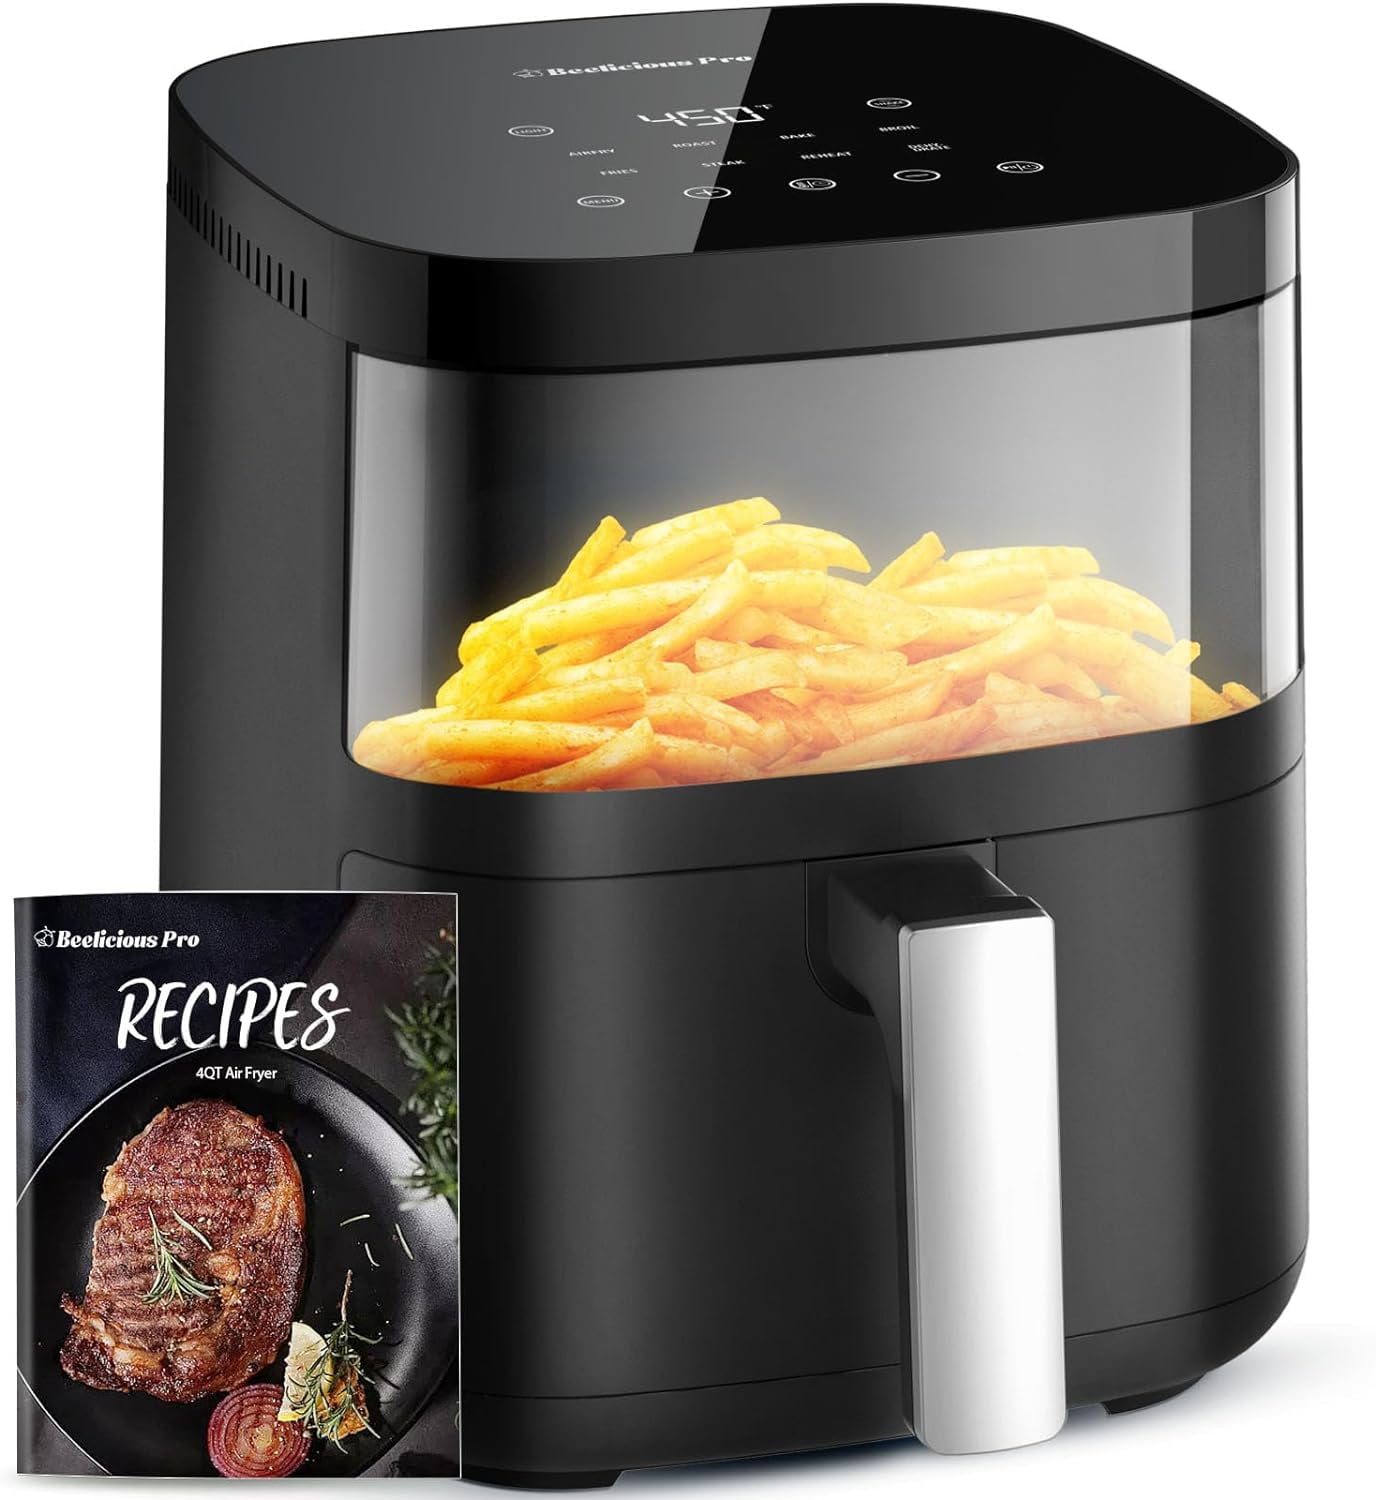 Air Fryer 5 Qt Fast And Convenient Meals, Up To 450°F, Quiet Operation, 85%  Less Oil, 10 Customizable Functions In 1, Compact, Dishwasher Safe, Grey f